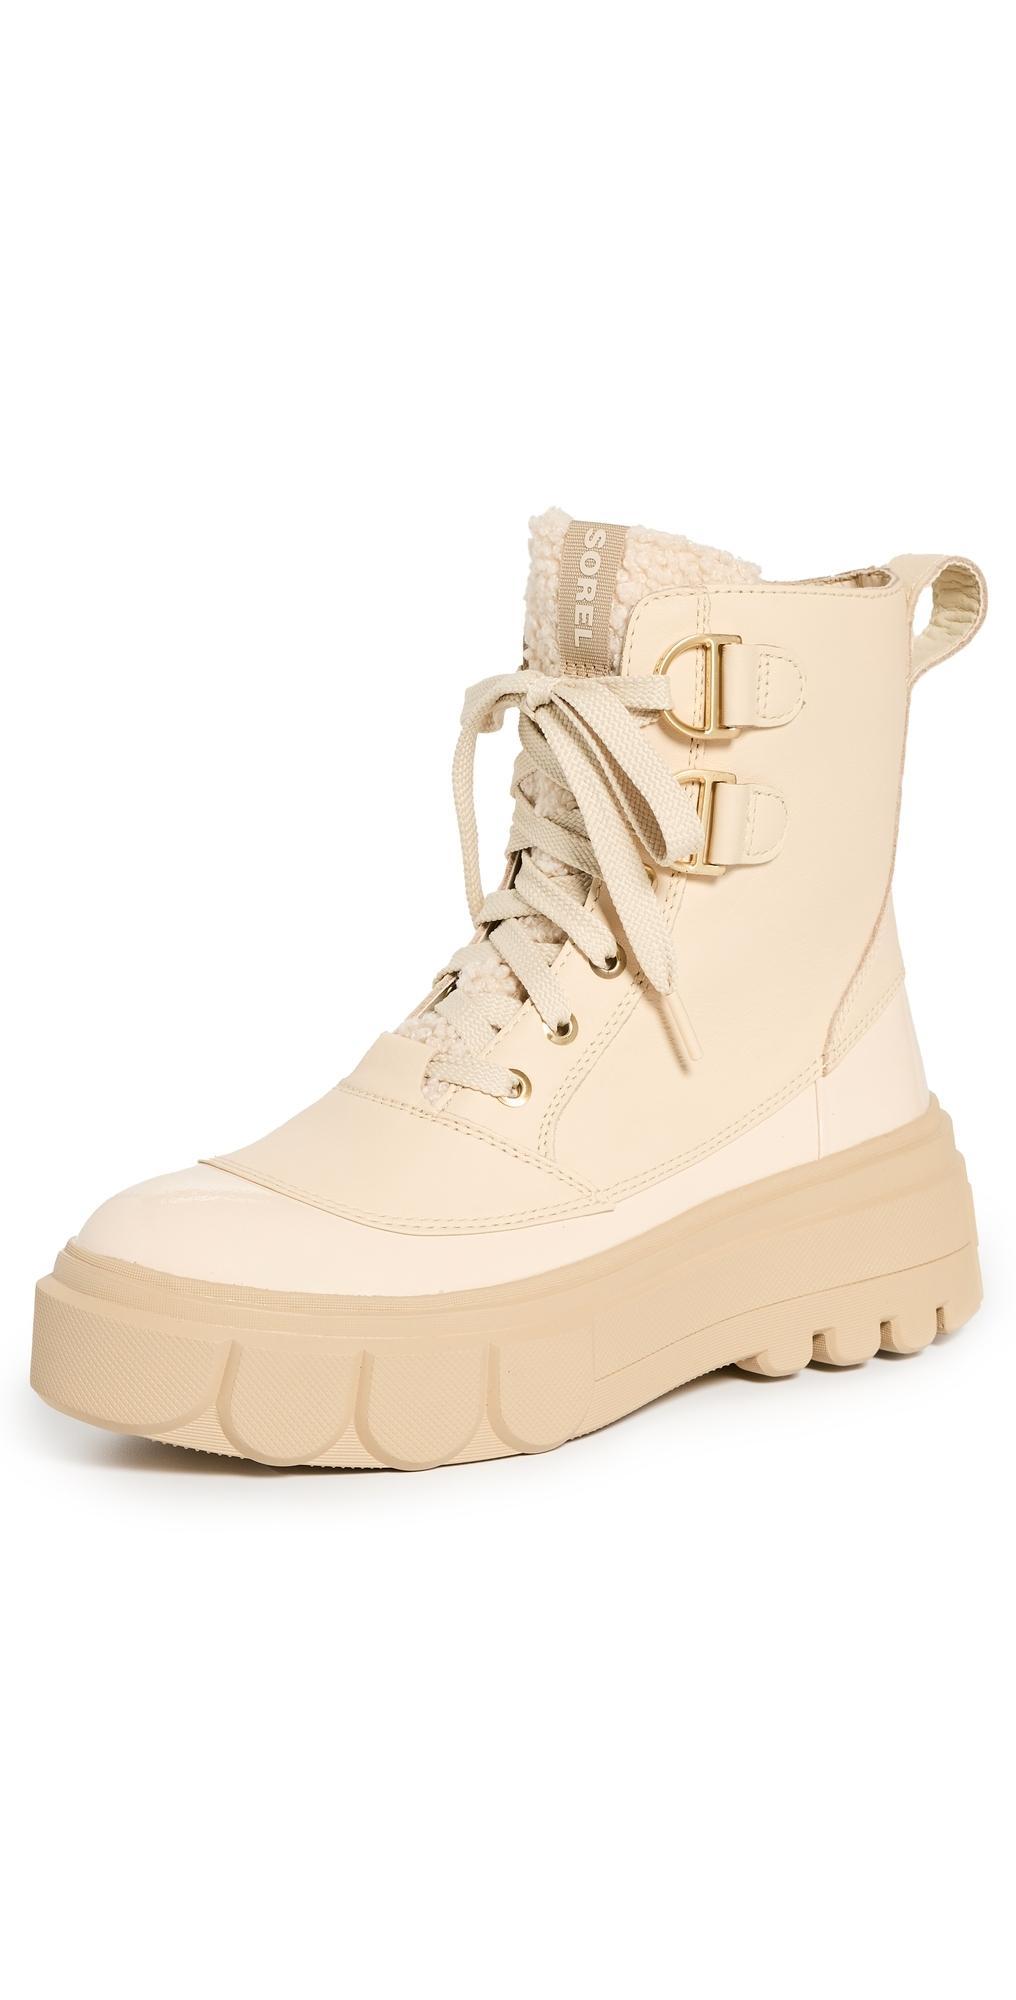 SOREL Caribou X Waterproof Lace-Up Boot Product Image